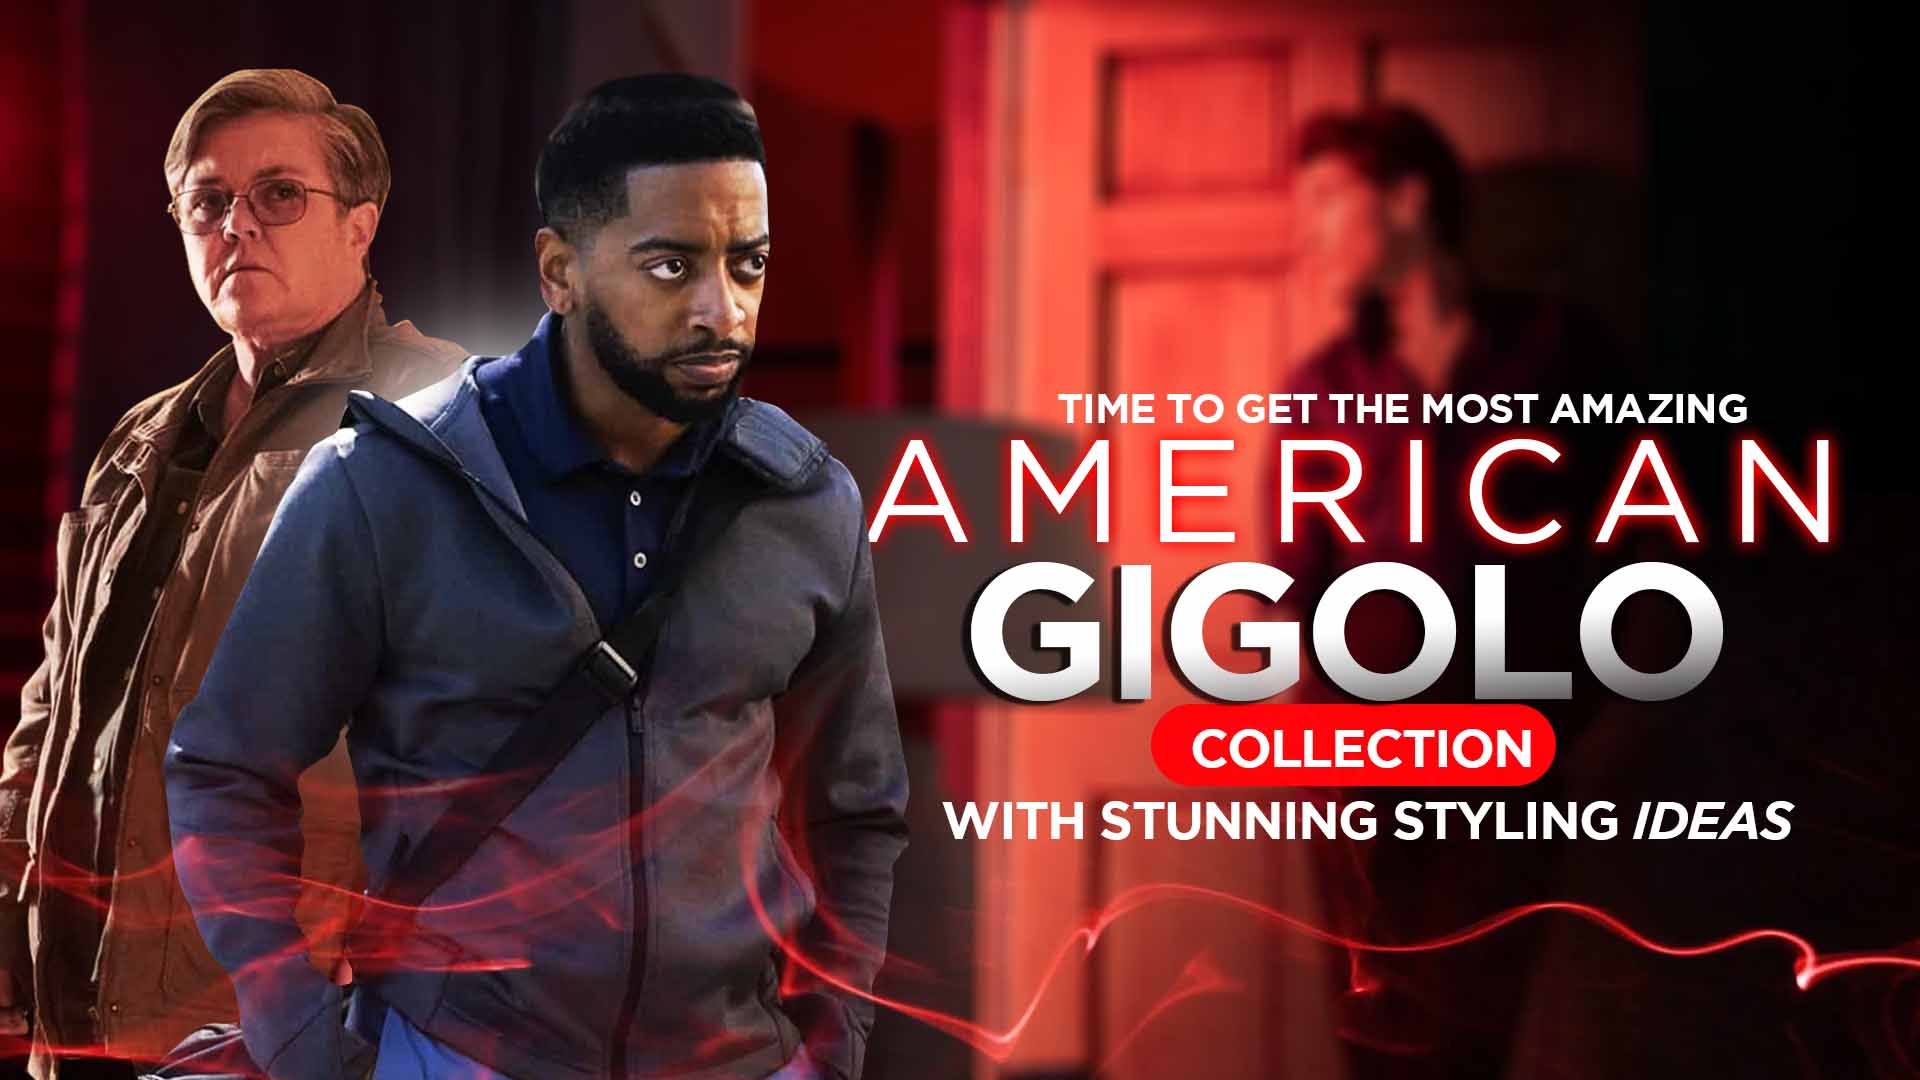 Time to Get the Most Amazing American Gigolo Outfits Collection with Stunning Styling Ideas